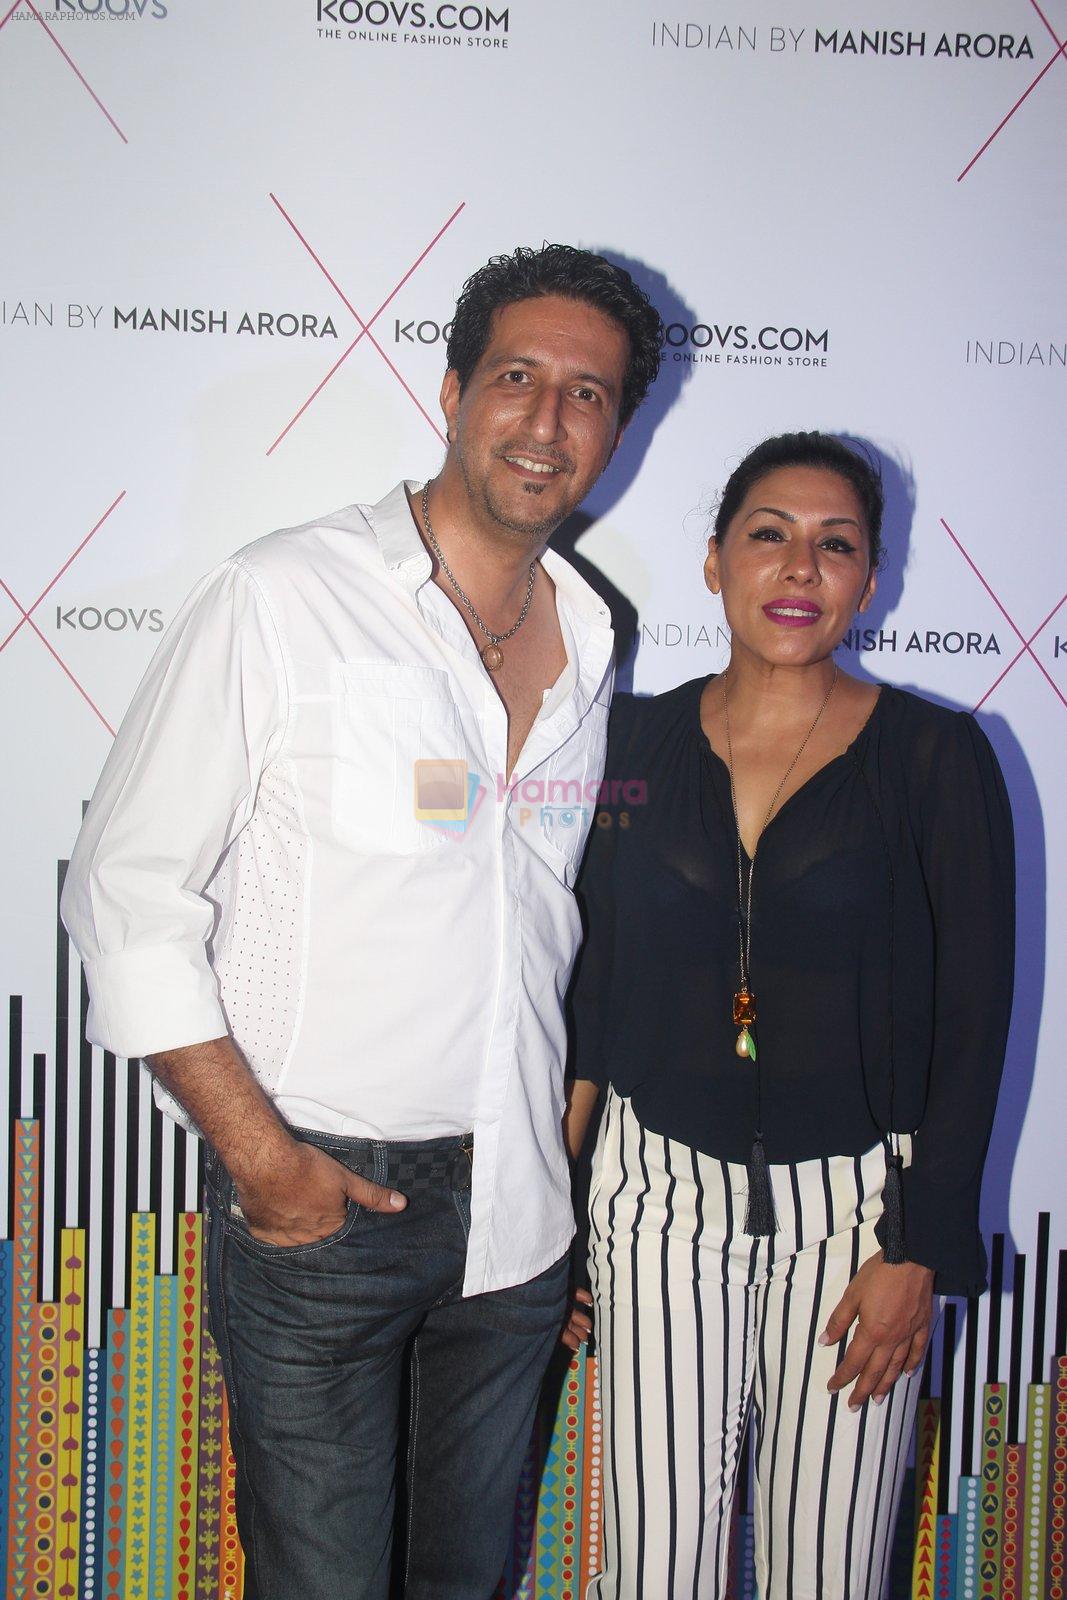 Sulaiman Merchant at Indian by Manish Arora for Koovs.com on 1st April 2016